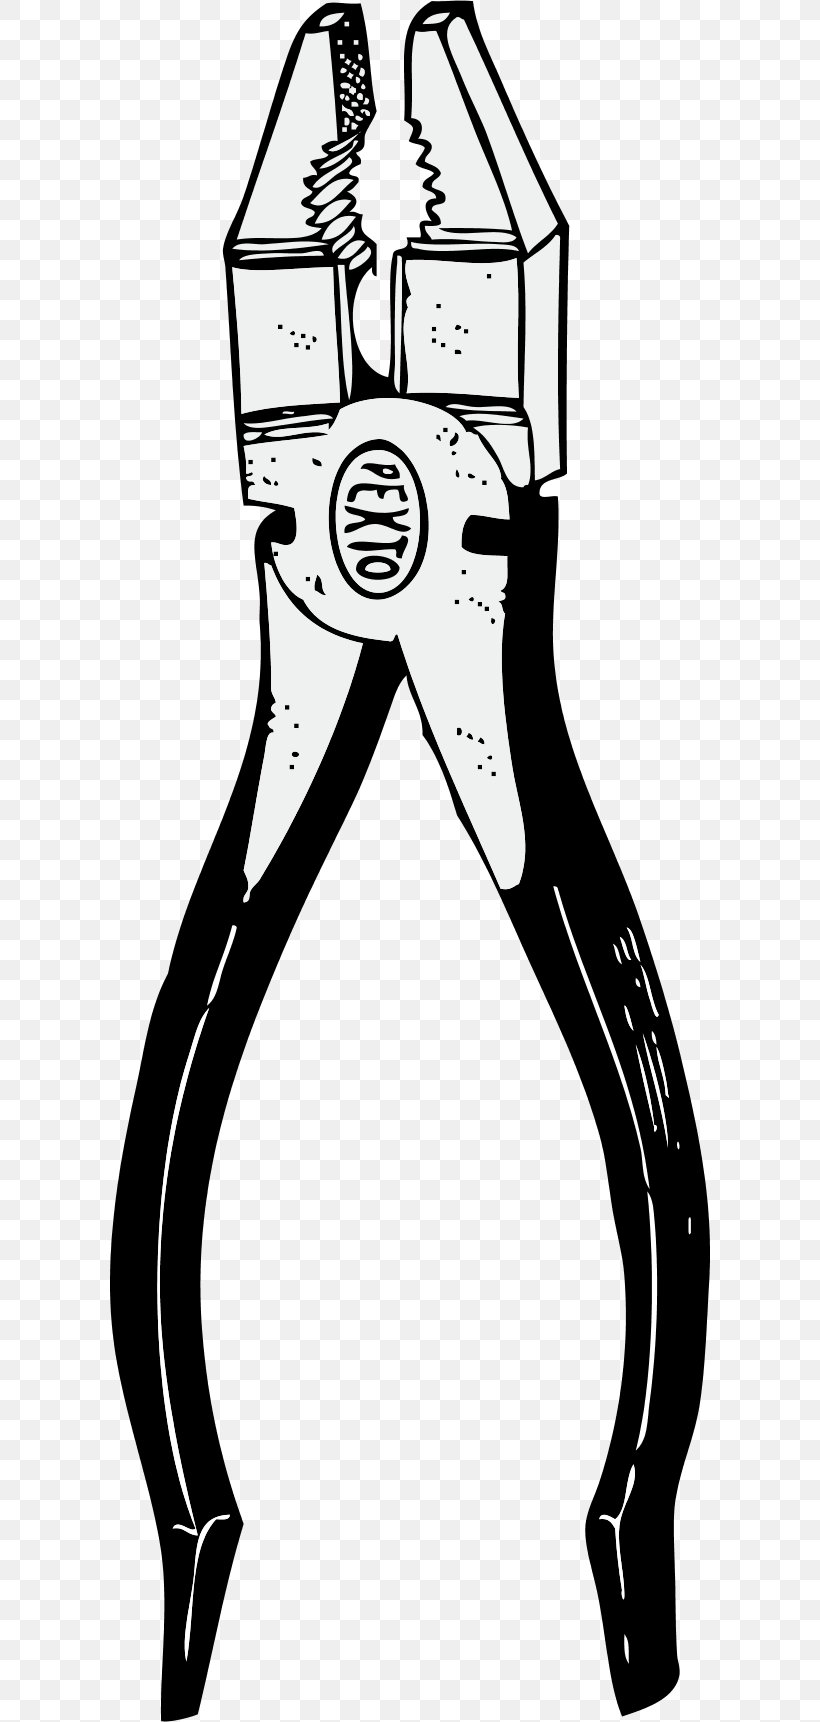 Hand Tool Pliers Clip Art, PNG, 600x1722px, Hand Tool, Area, Art, Black, Black And White Download Free